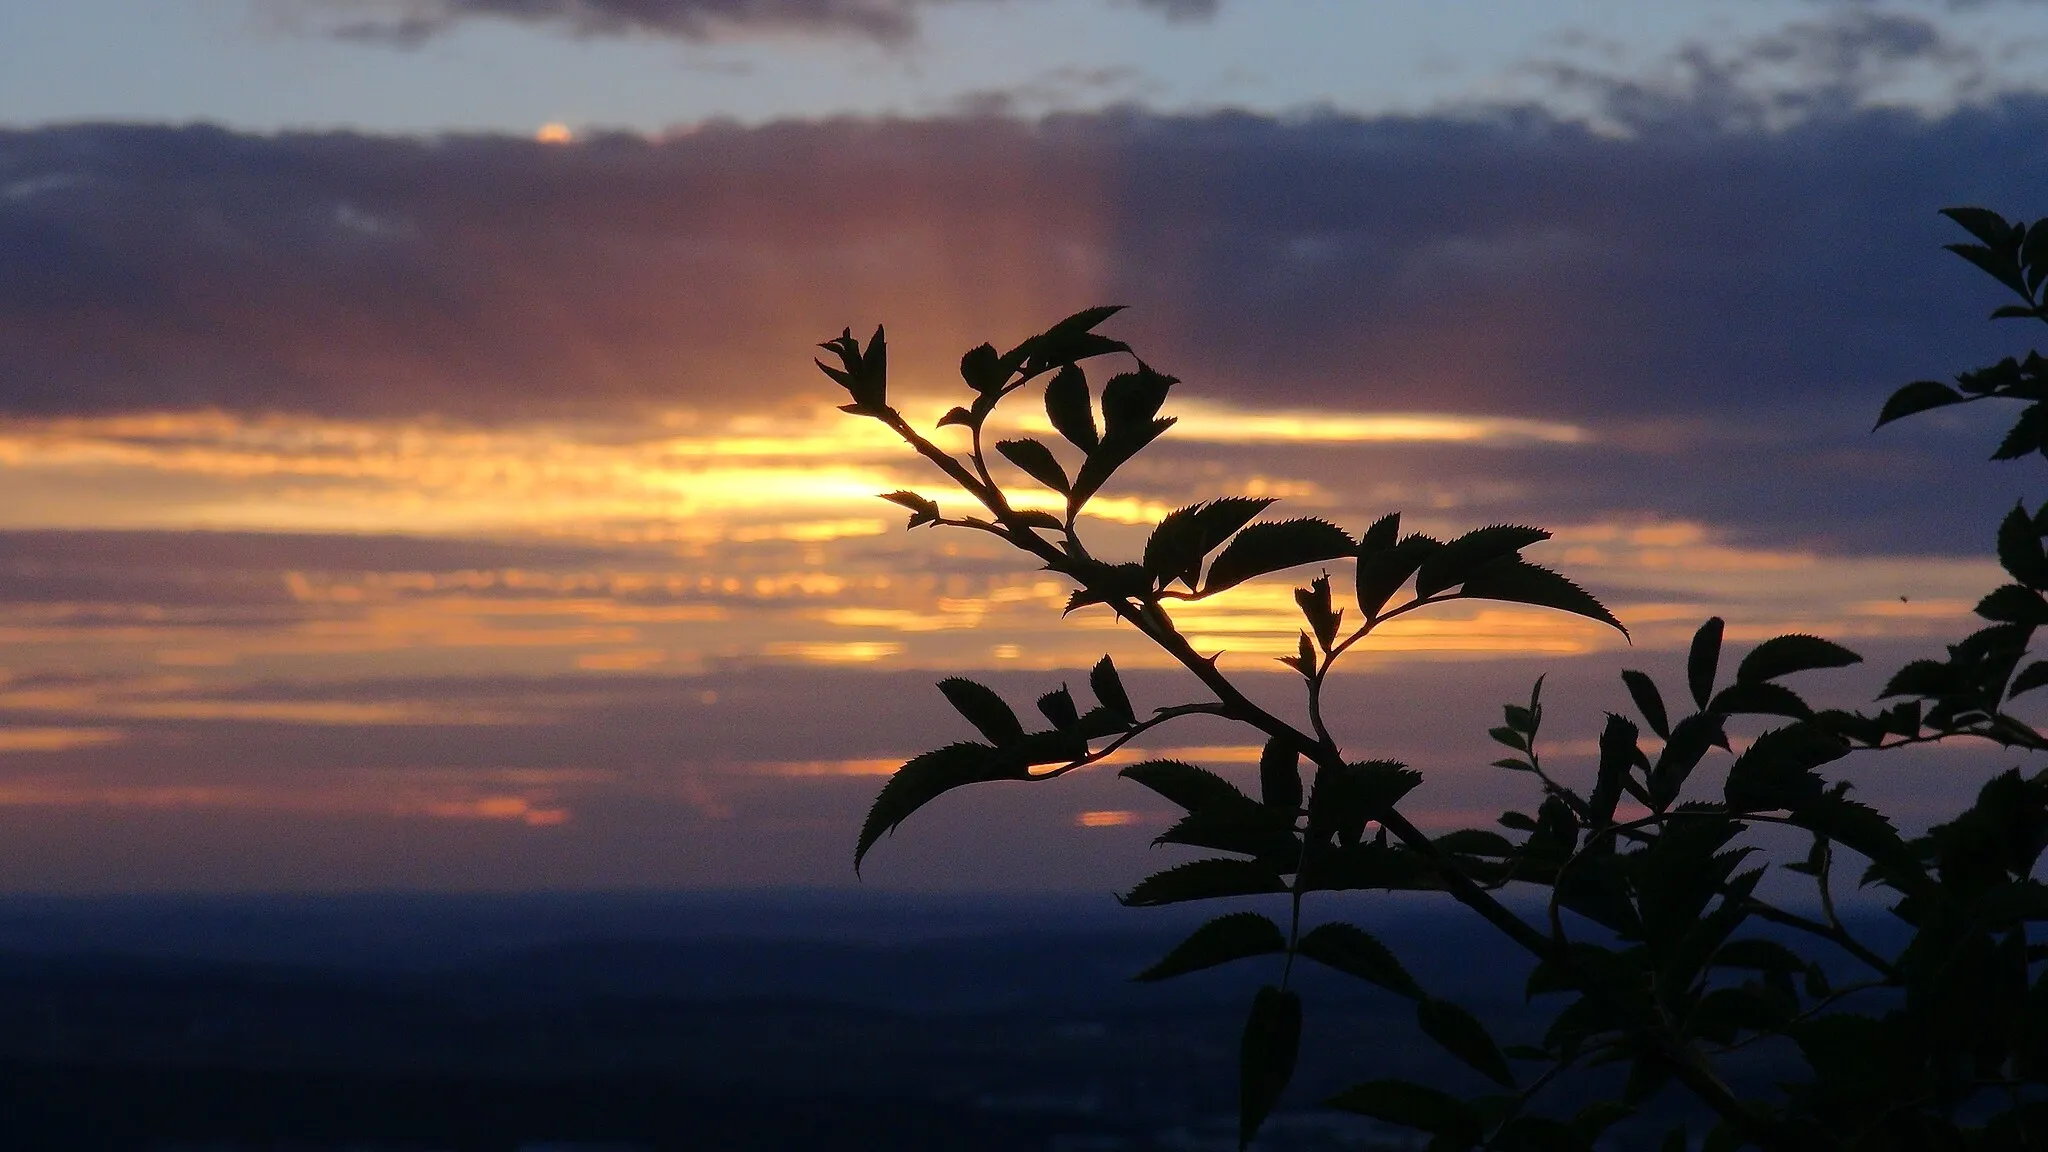 Photo showing: A sunset in Reutlingen, Germany with a twig in the foreground.